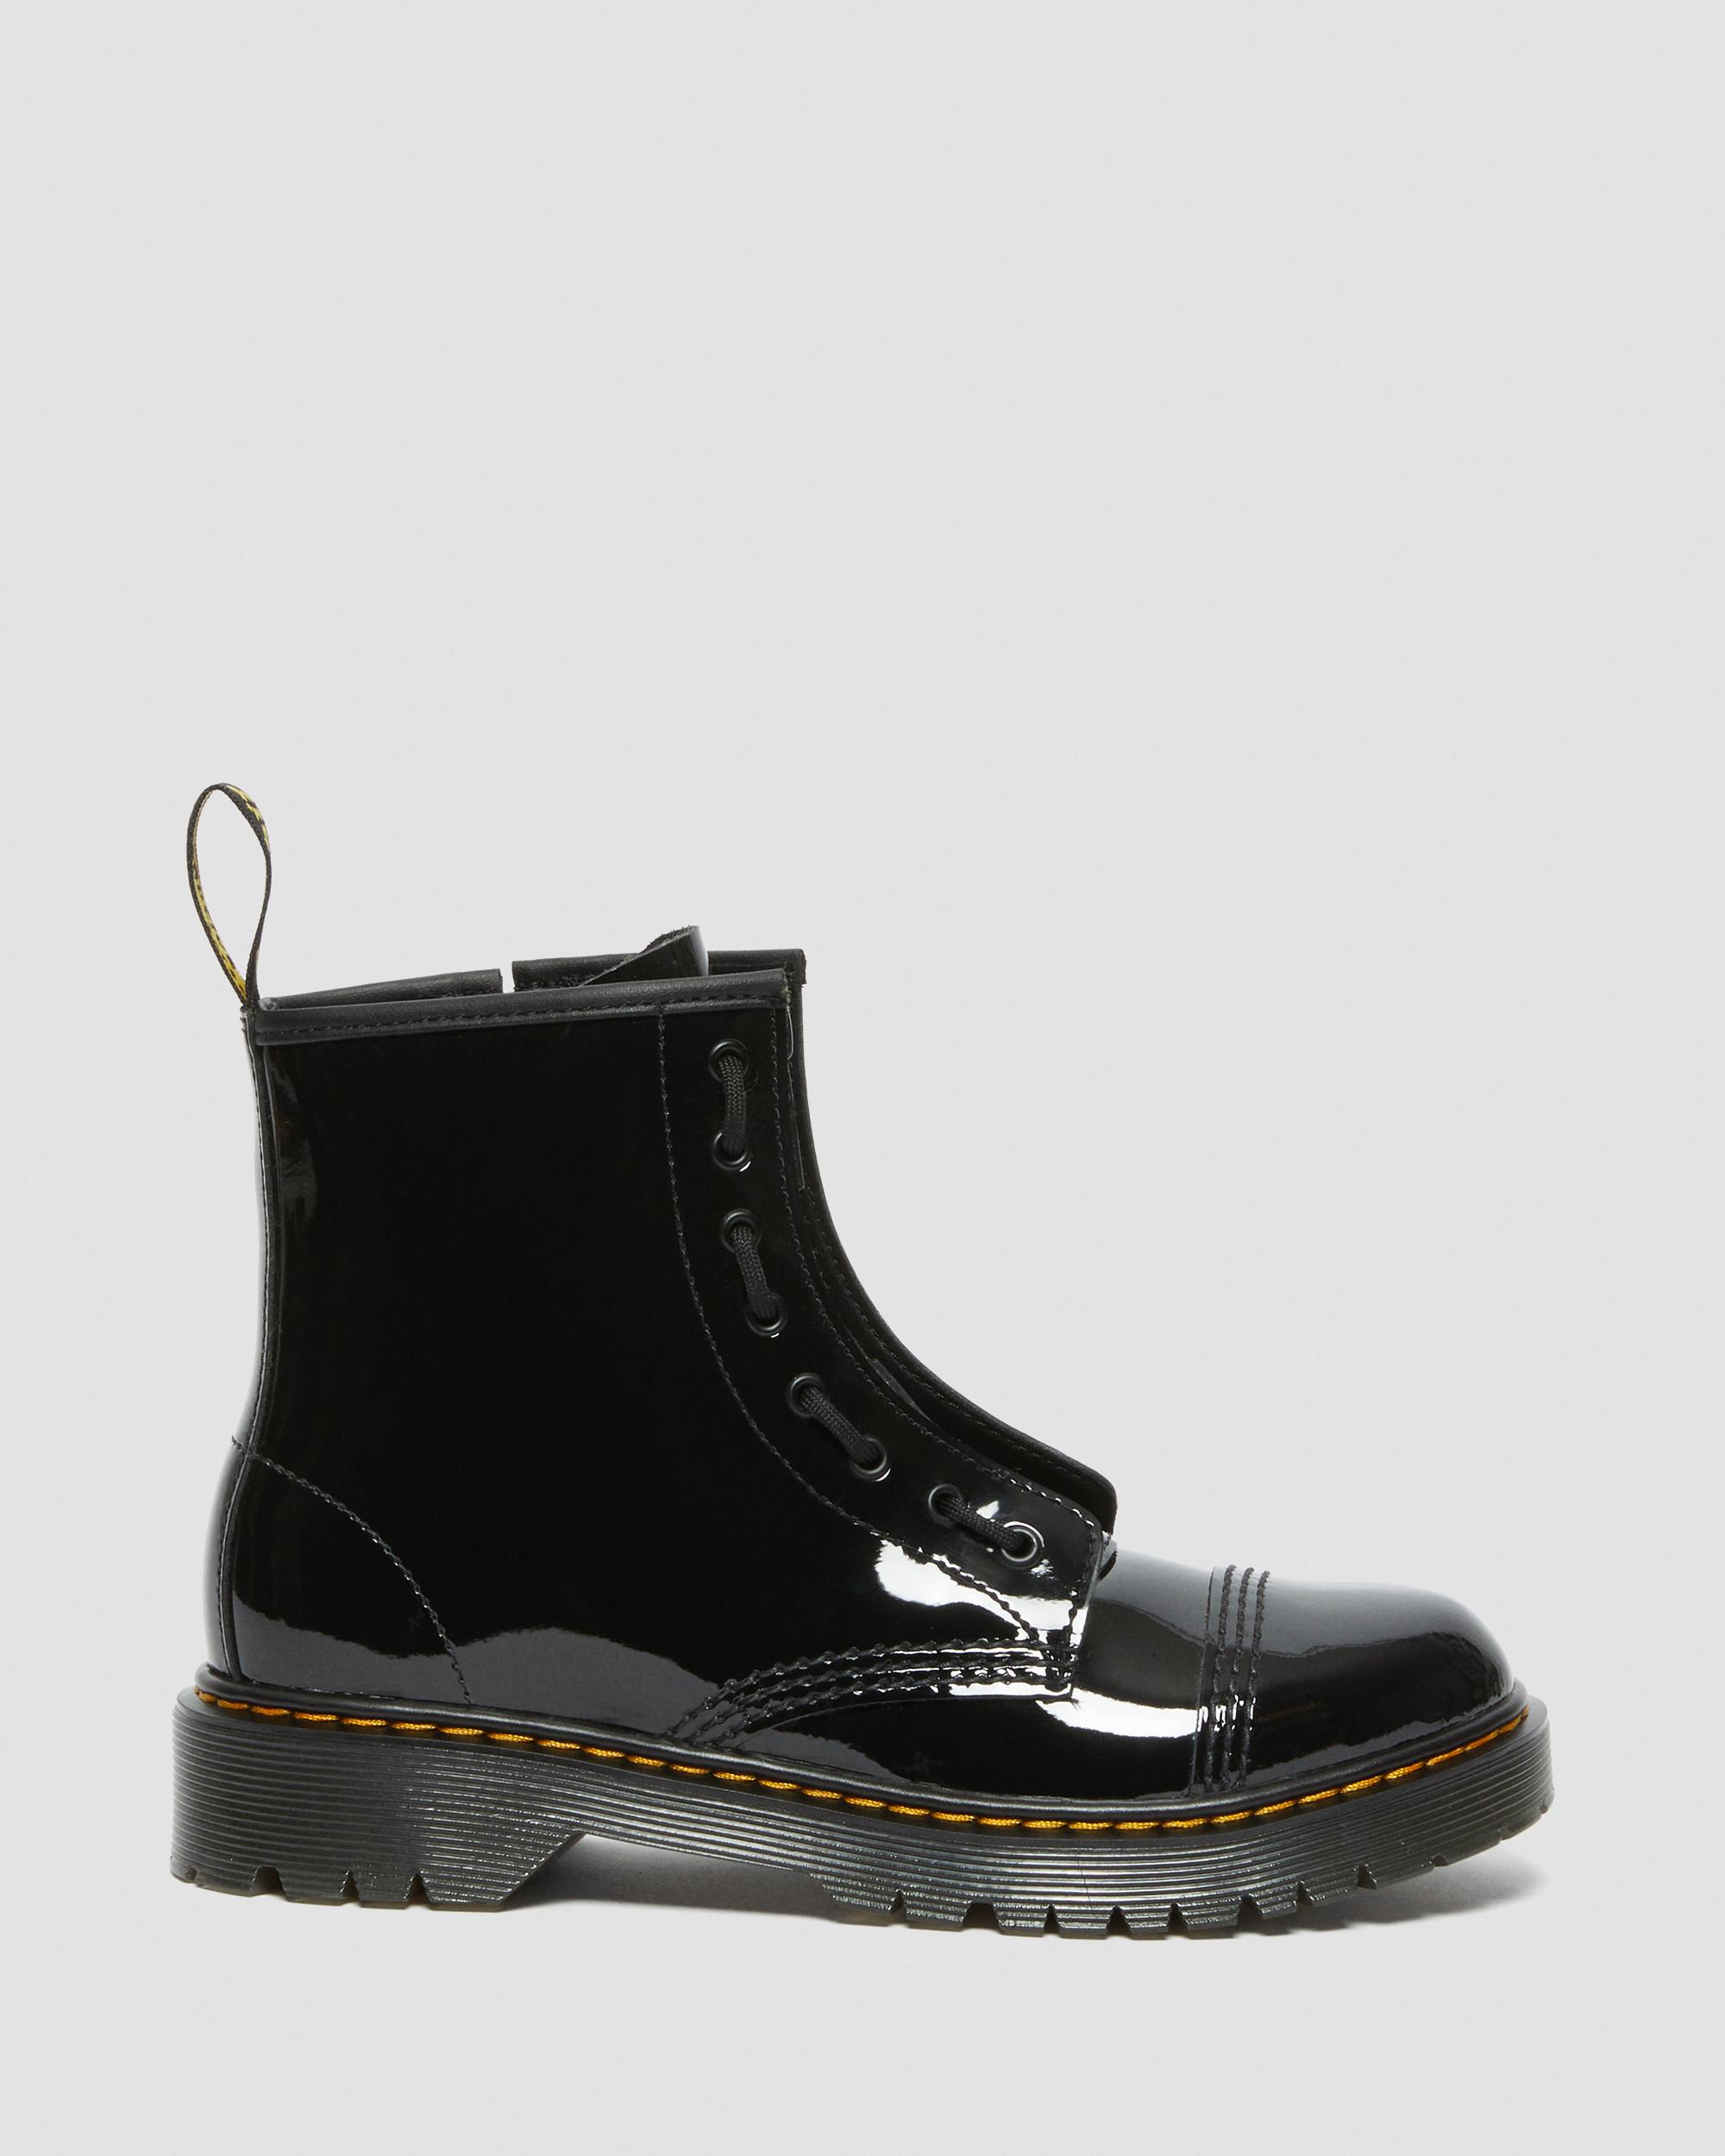 Youth Sinclair Bex Patent Leather Boots in Black | Dr. Martens